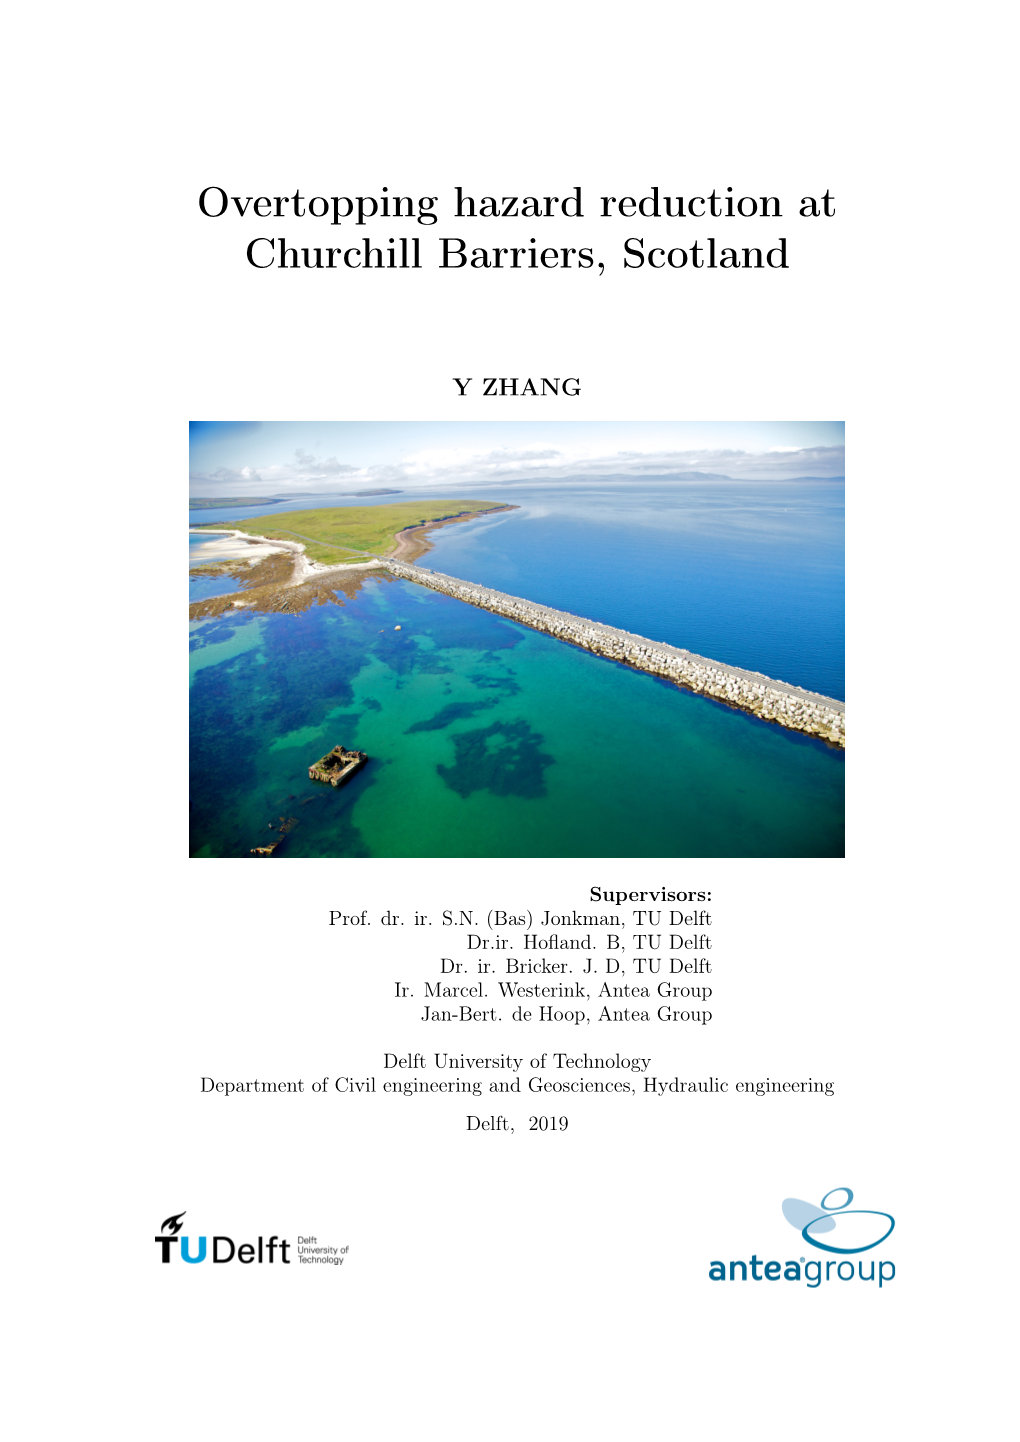 Overtopping Hazard Reduction at Churchill Barriers, Scotland